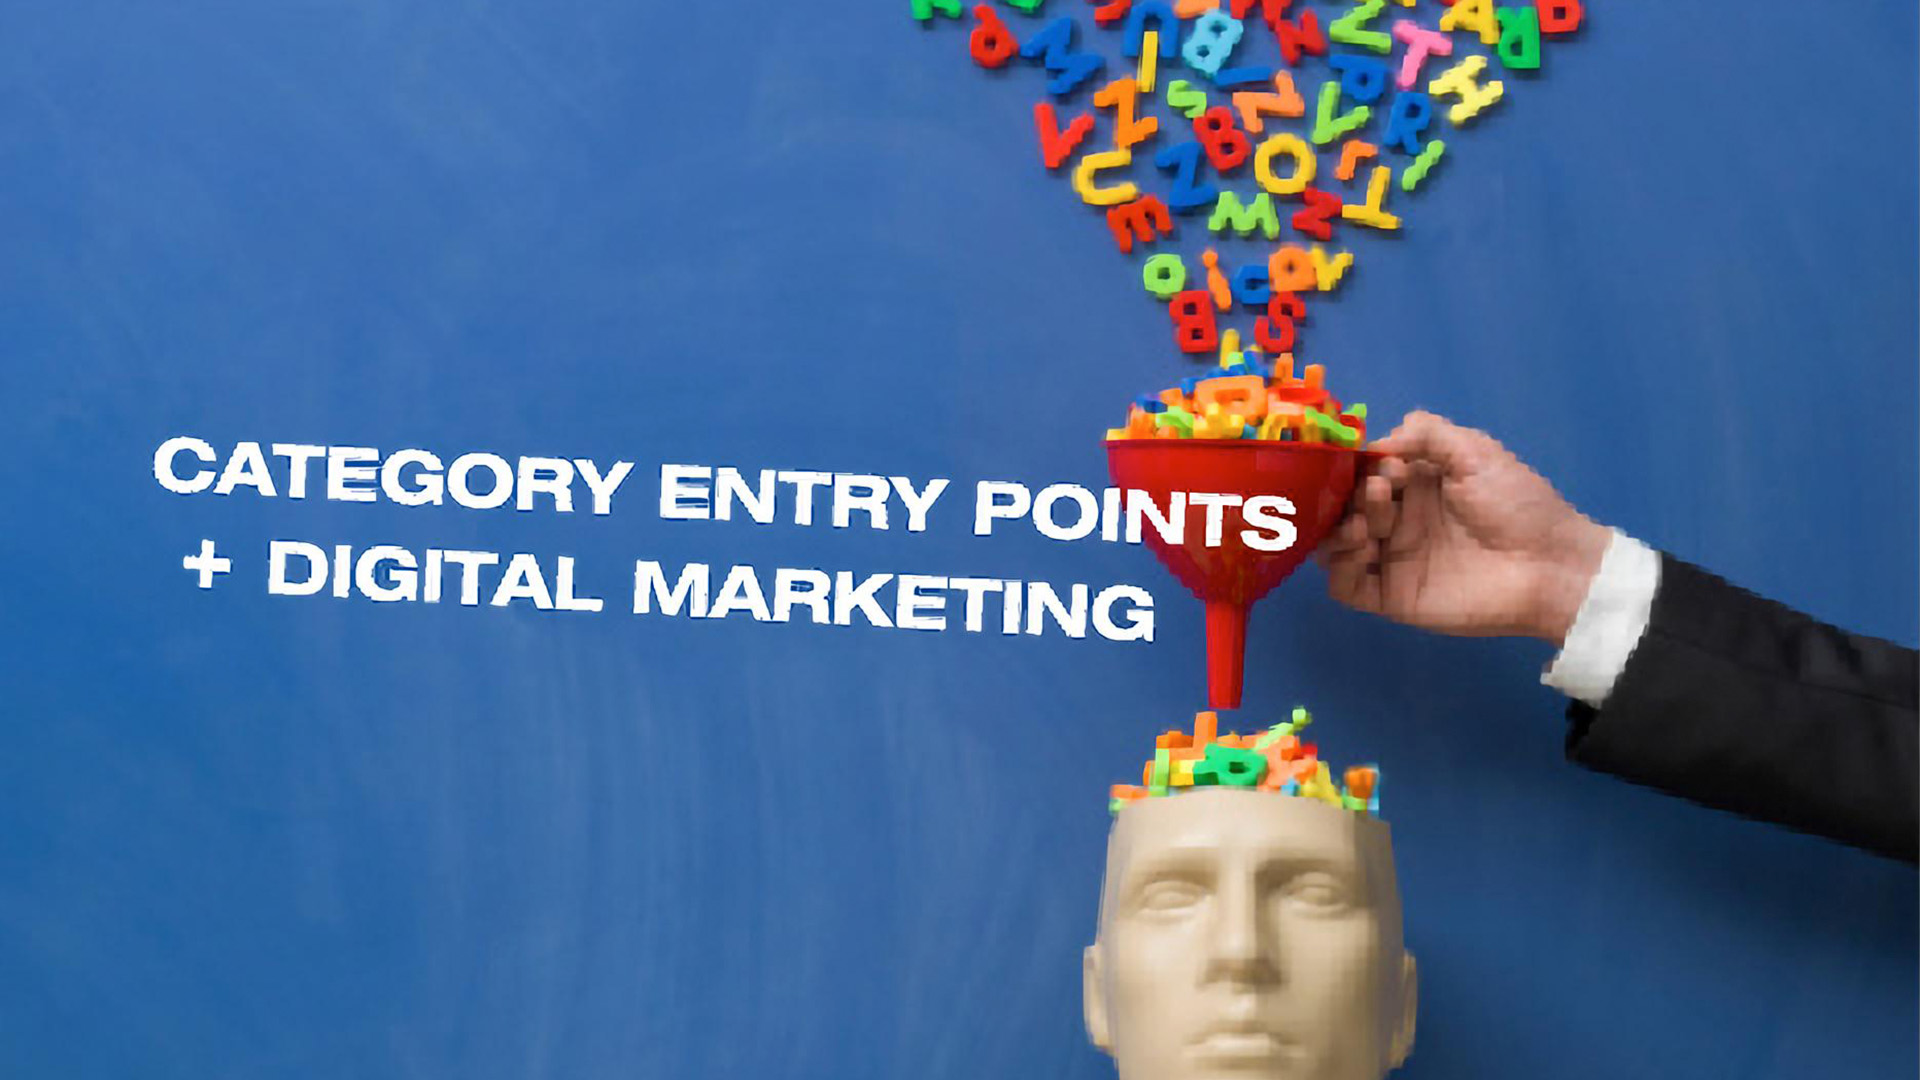 How Category Entry Points apply to digital marketing